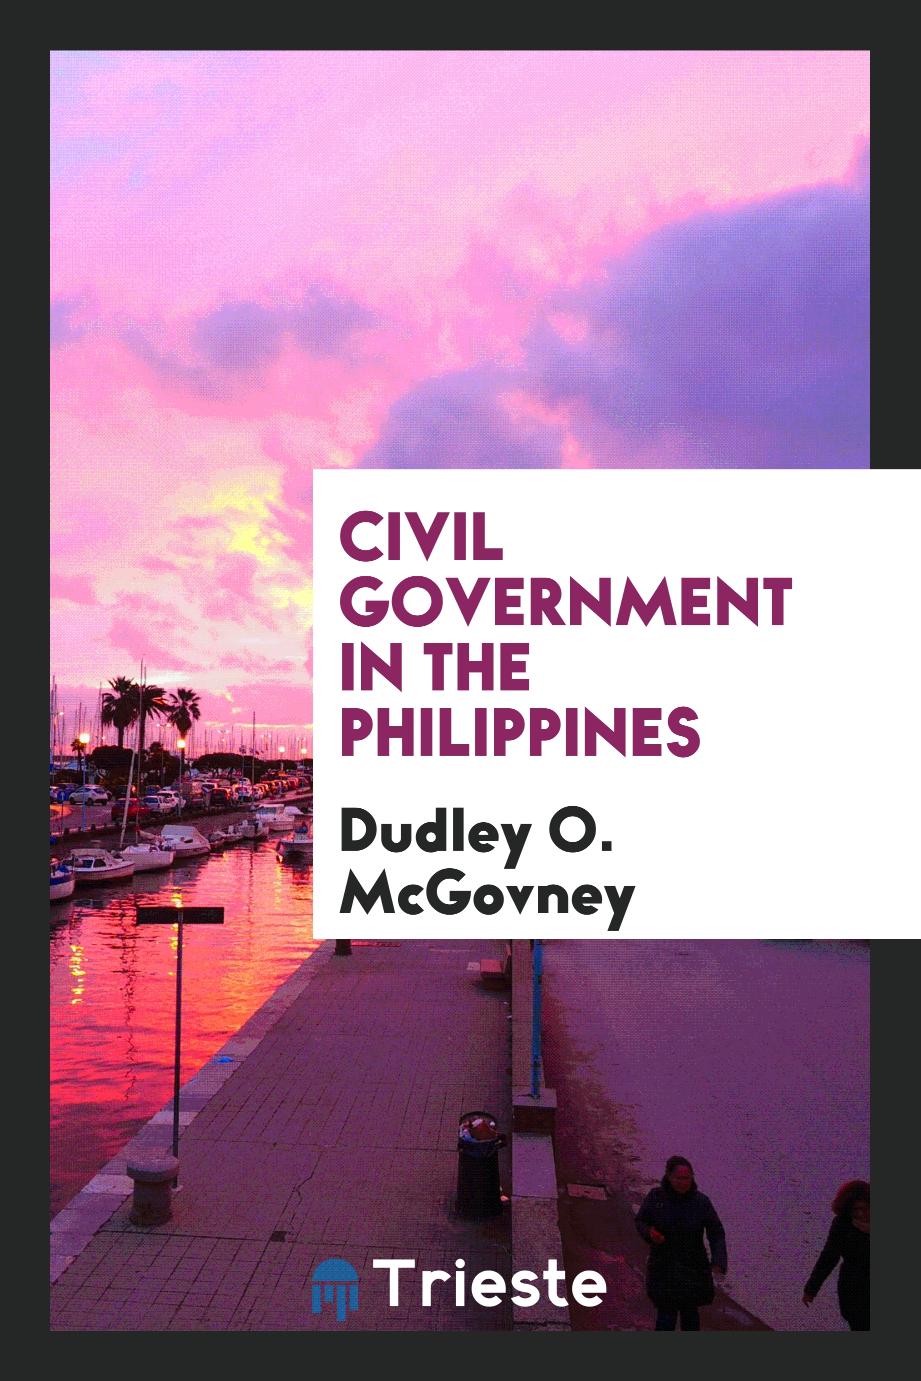 Civil government in the Philippines